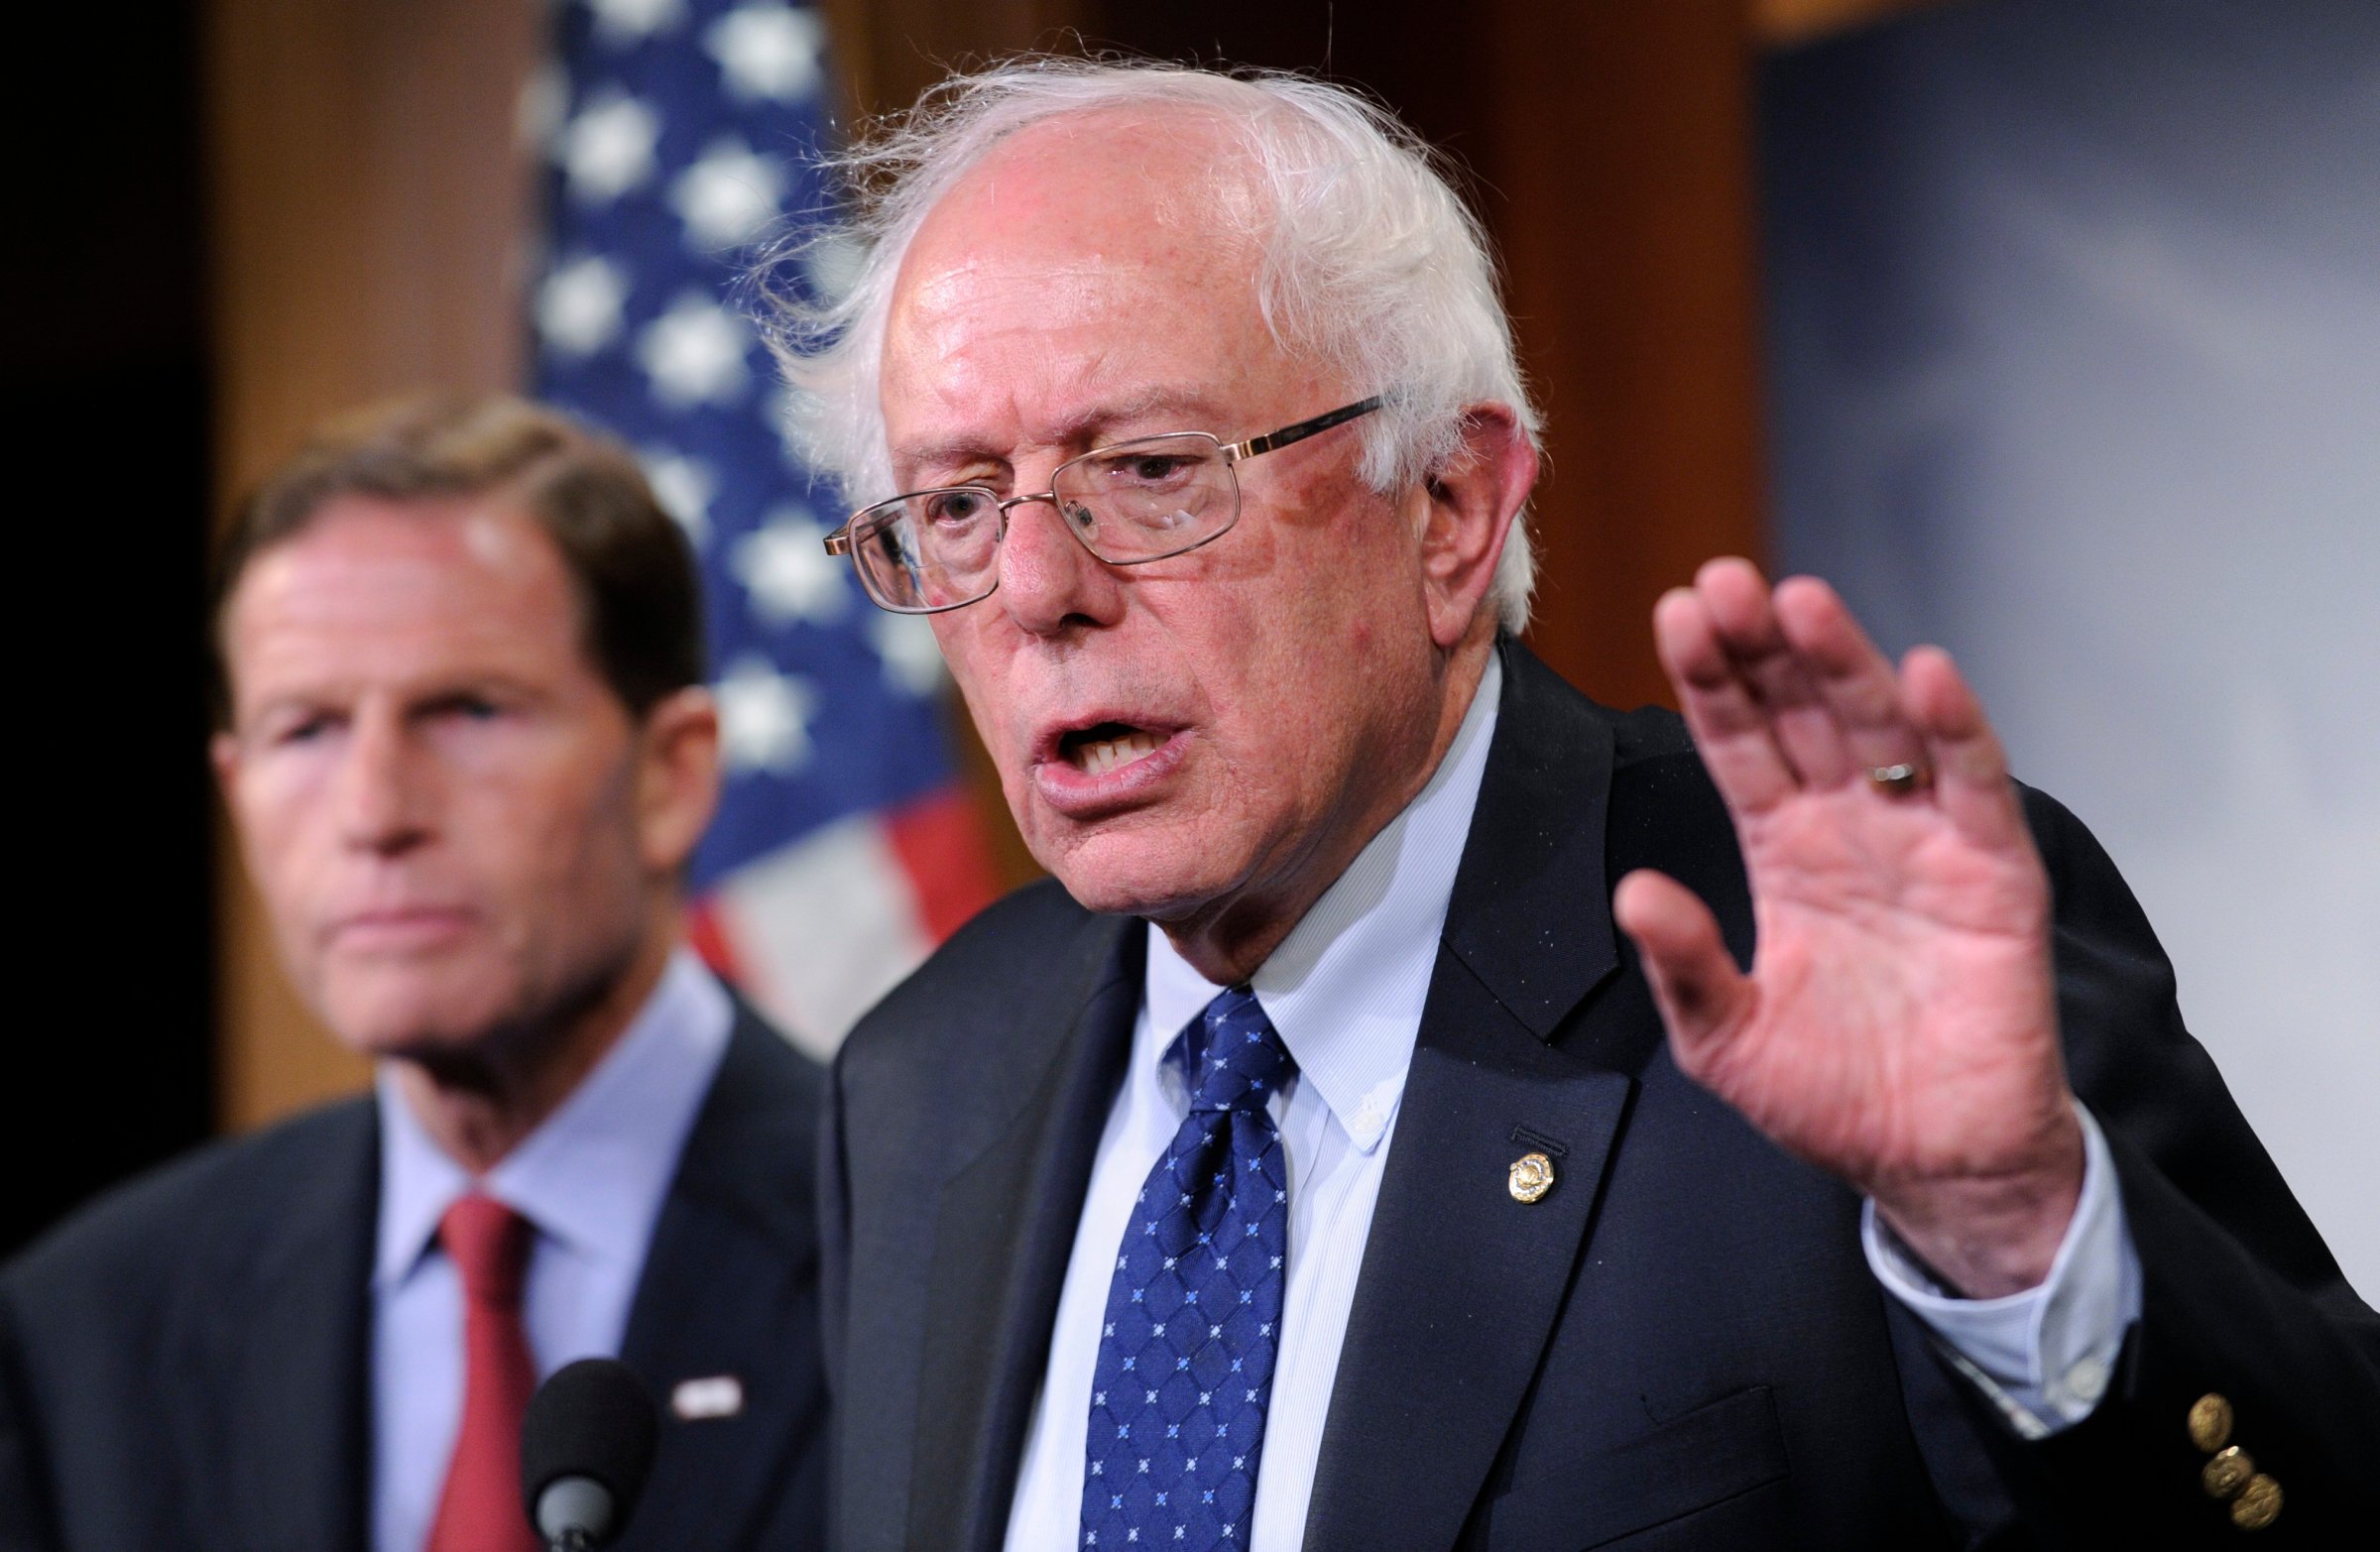 From right: Senator Bernie Sanders and Senator Richard Blumenthal during a news conference on Capitol Hill in Washington, D.C., on July 24, 2014.